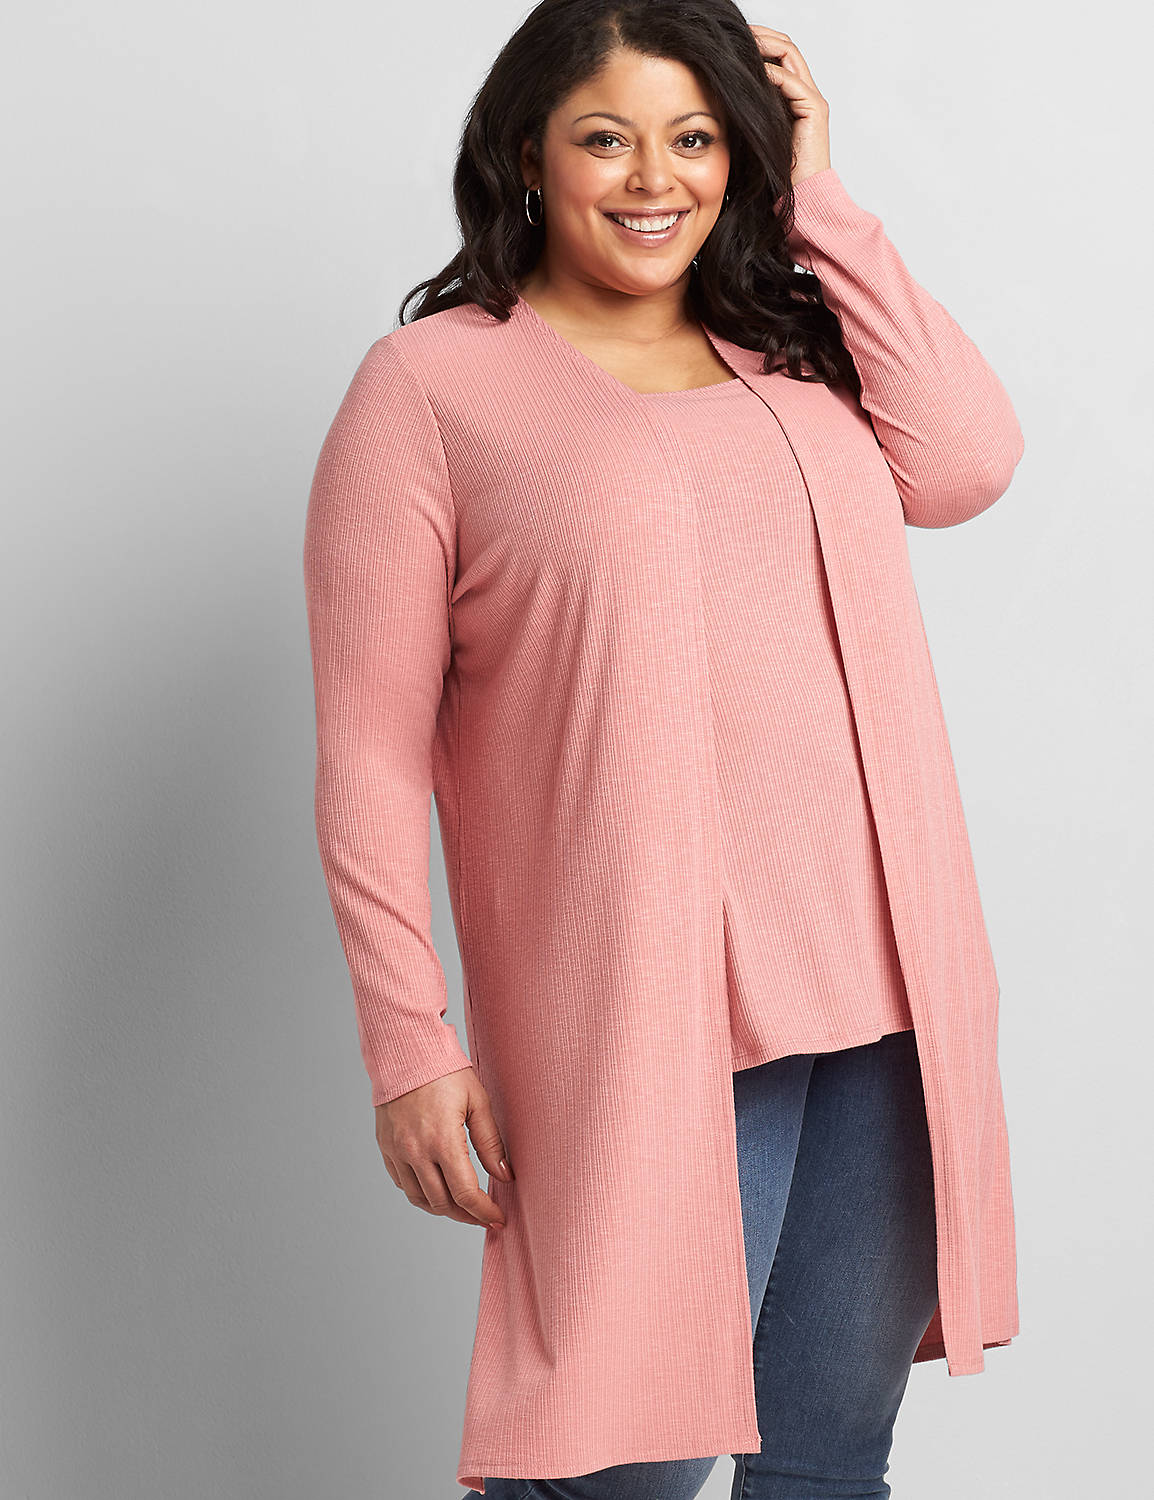 Long Sleeve V Neck Double Tie Front Duster 1118694:PANTONE Dusty Rose:18/20 Product Image 1